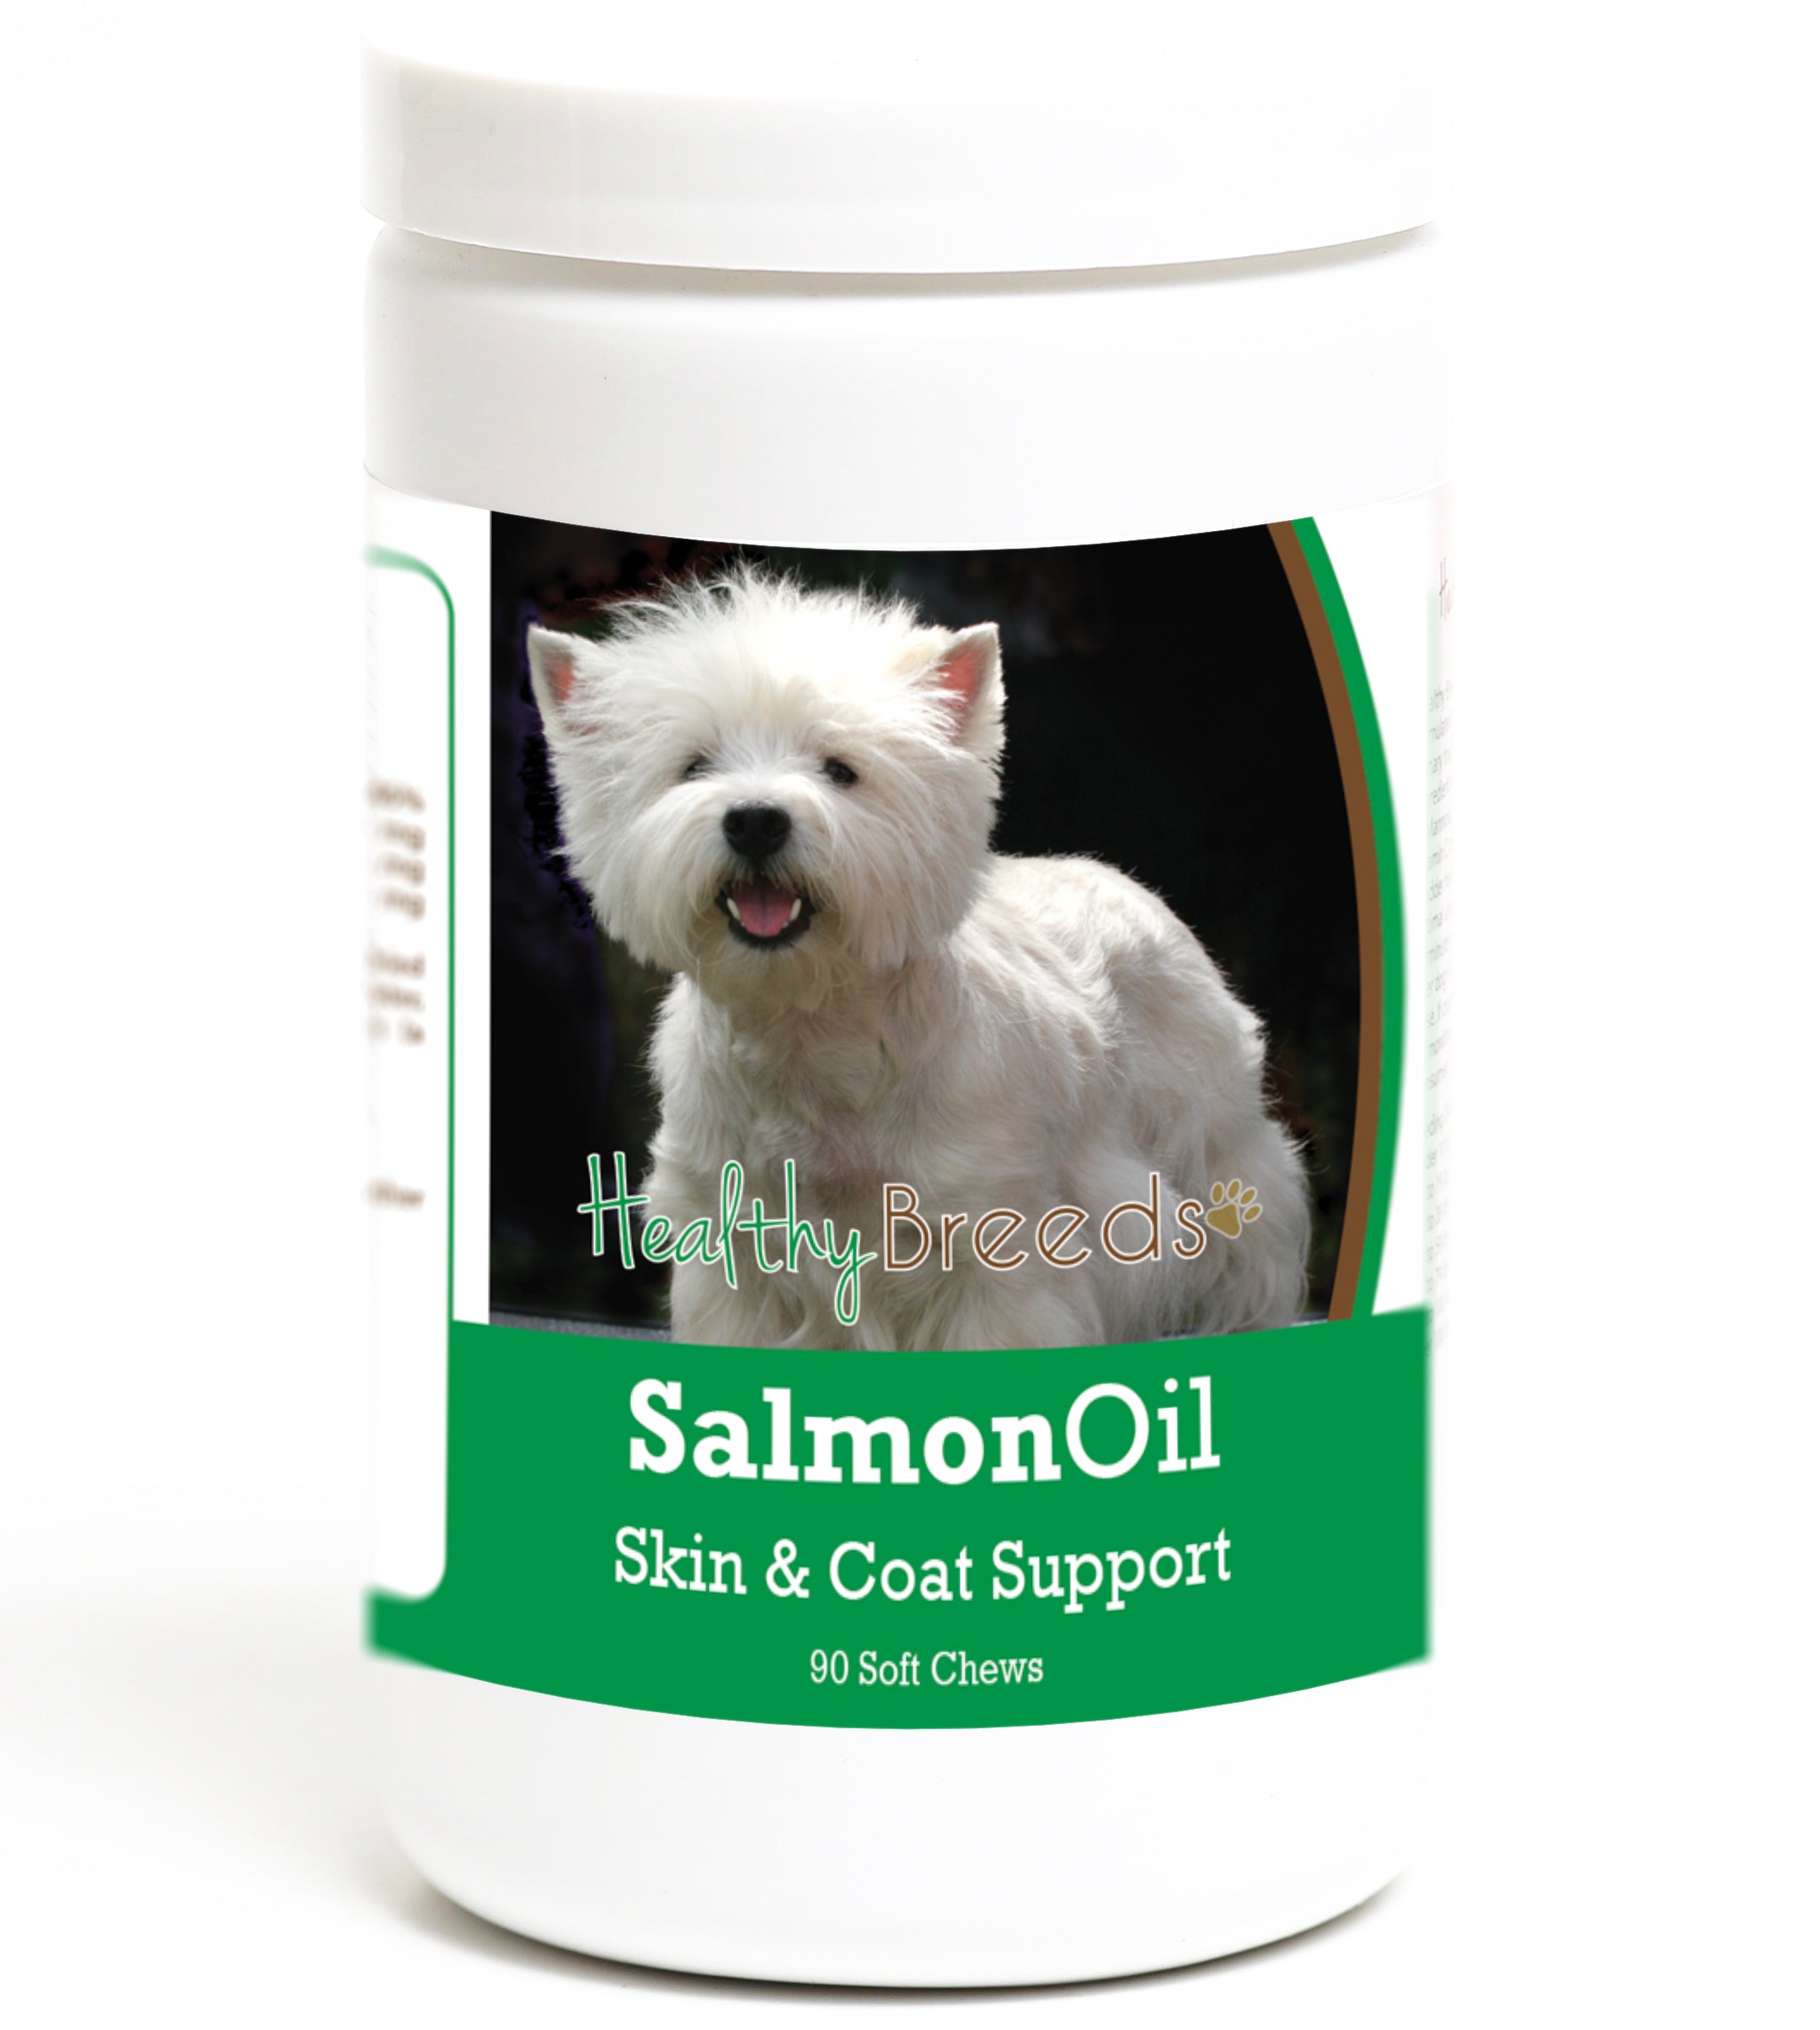 West Highland White Terrier Salmon Oil Soft Chews 90 Count